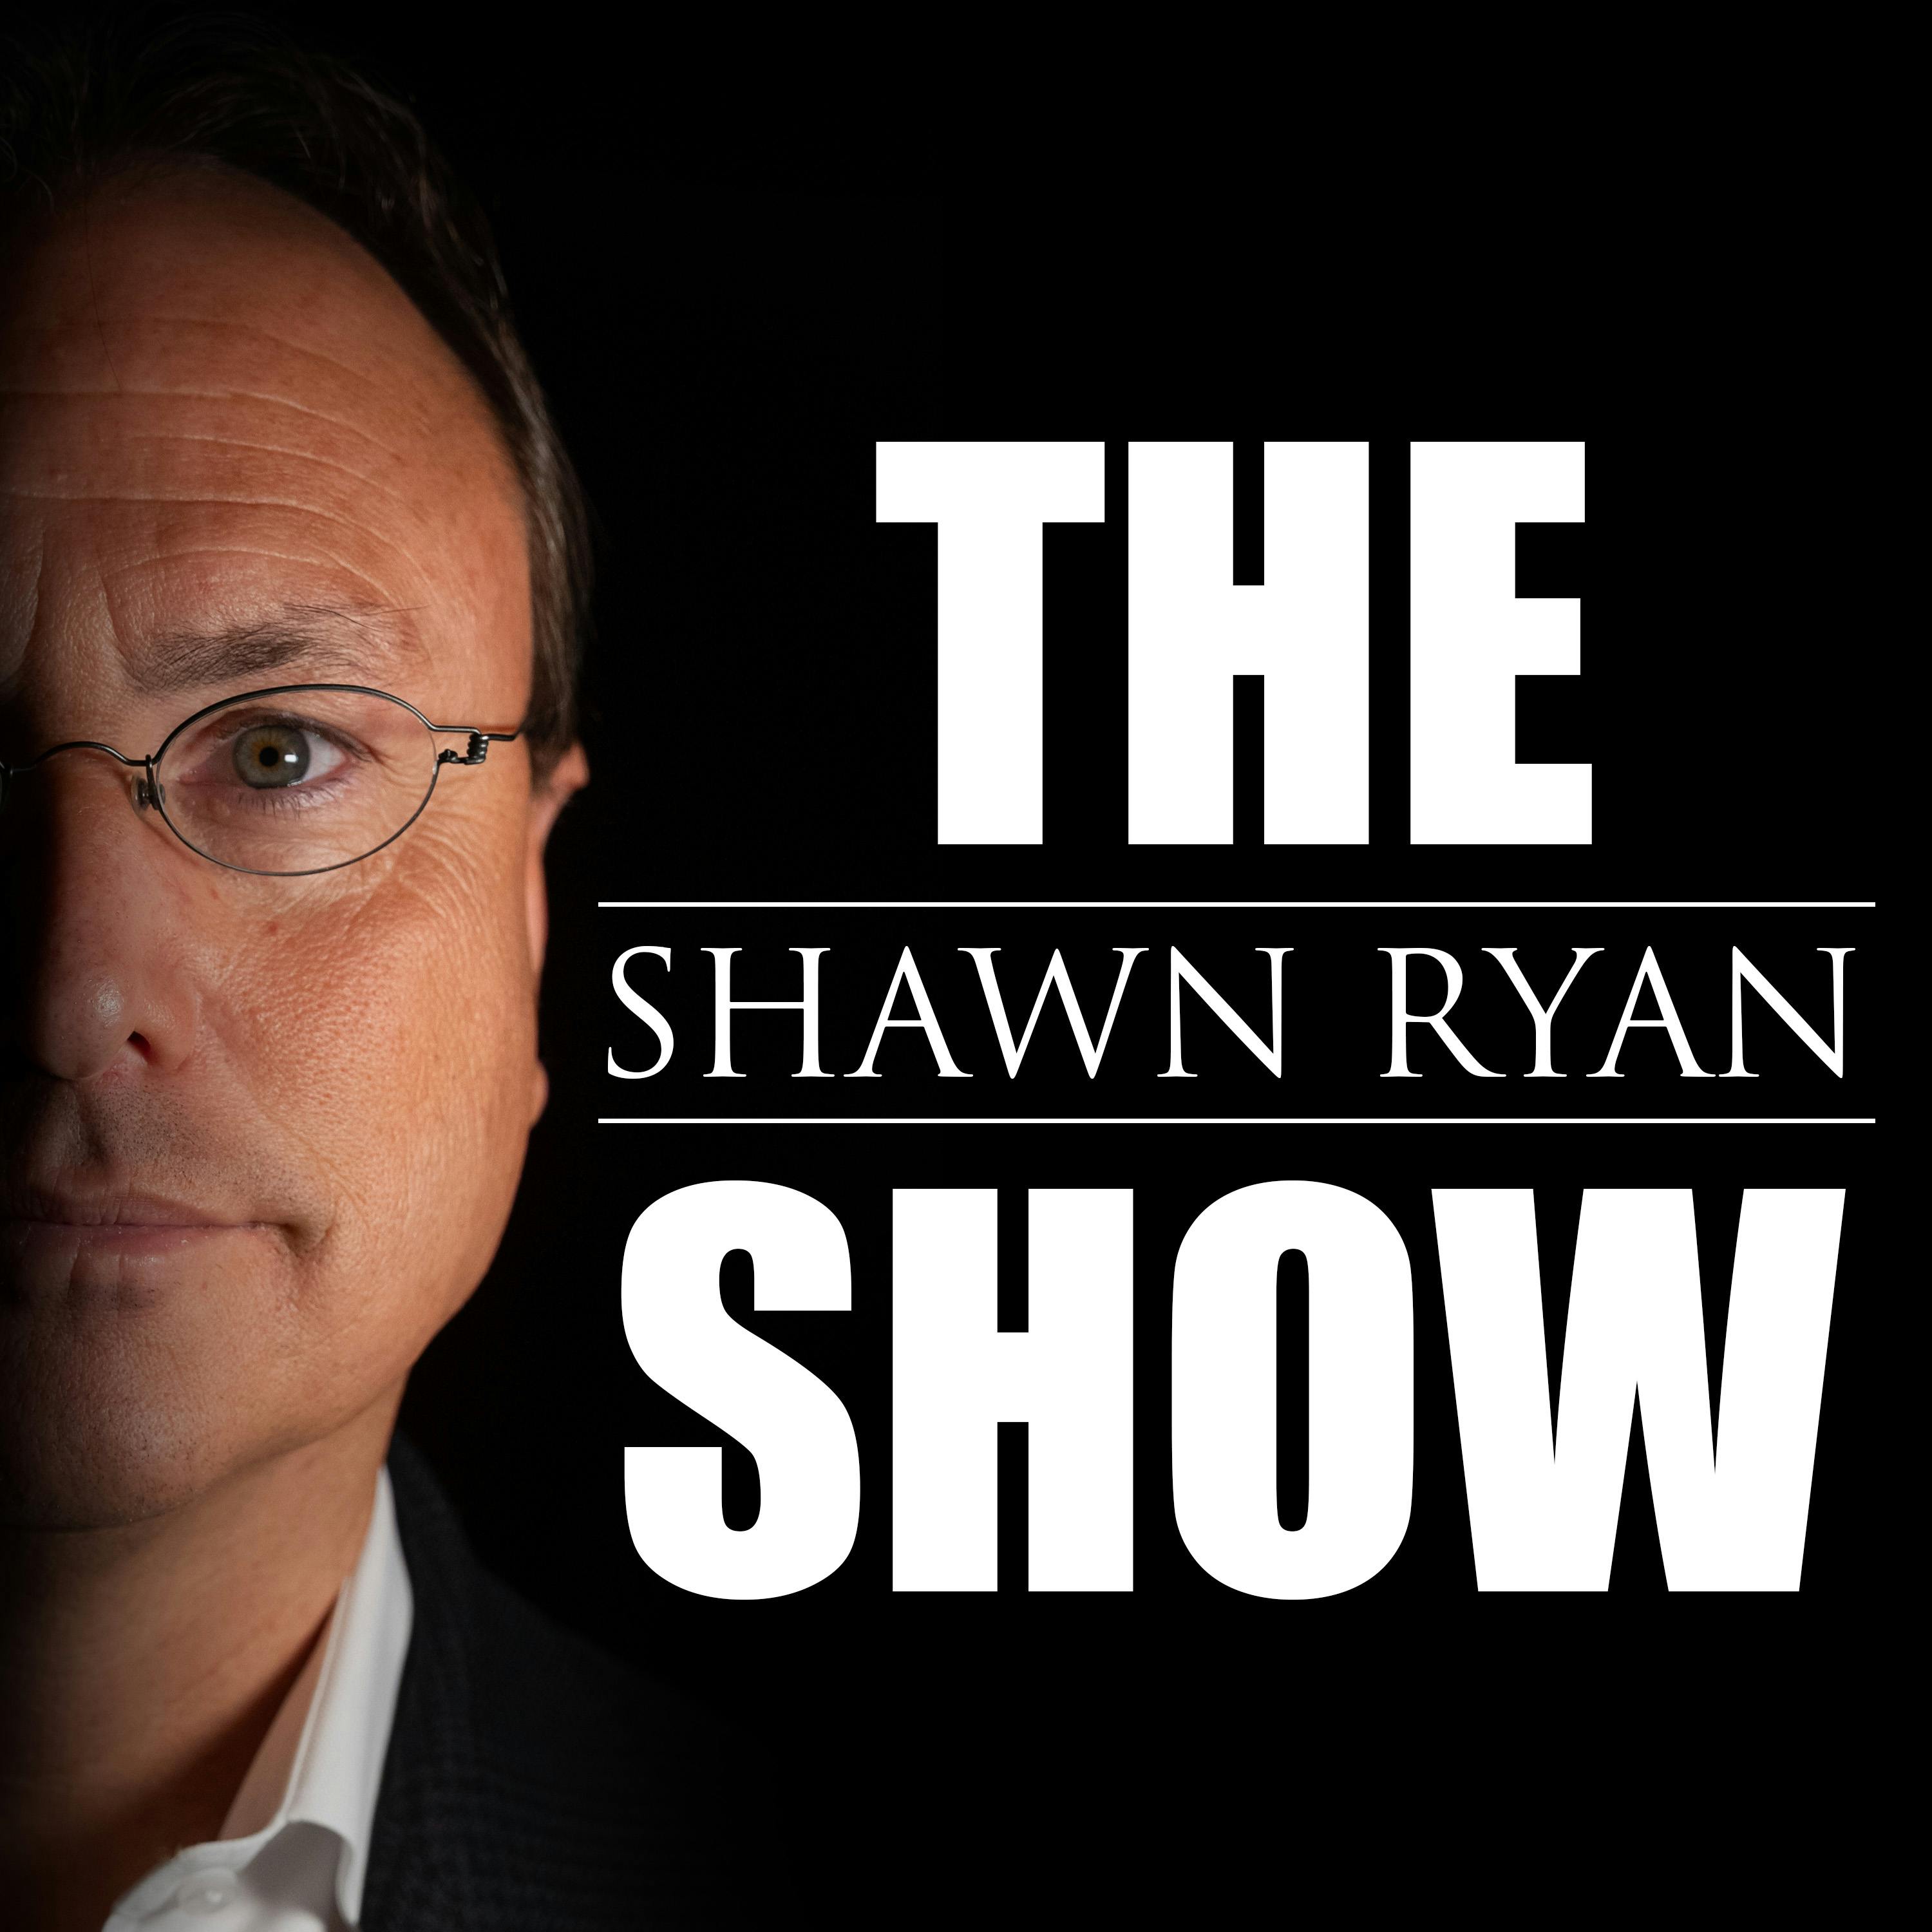 #70 Brandon Fugal - Owner of the Mysterious Skinwalker Ranch Reveals UAP/UFO Encounters  by Shawn Ryan | Cumulus Podcast Network